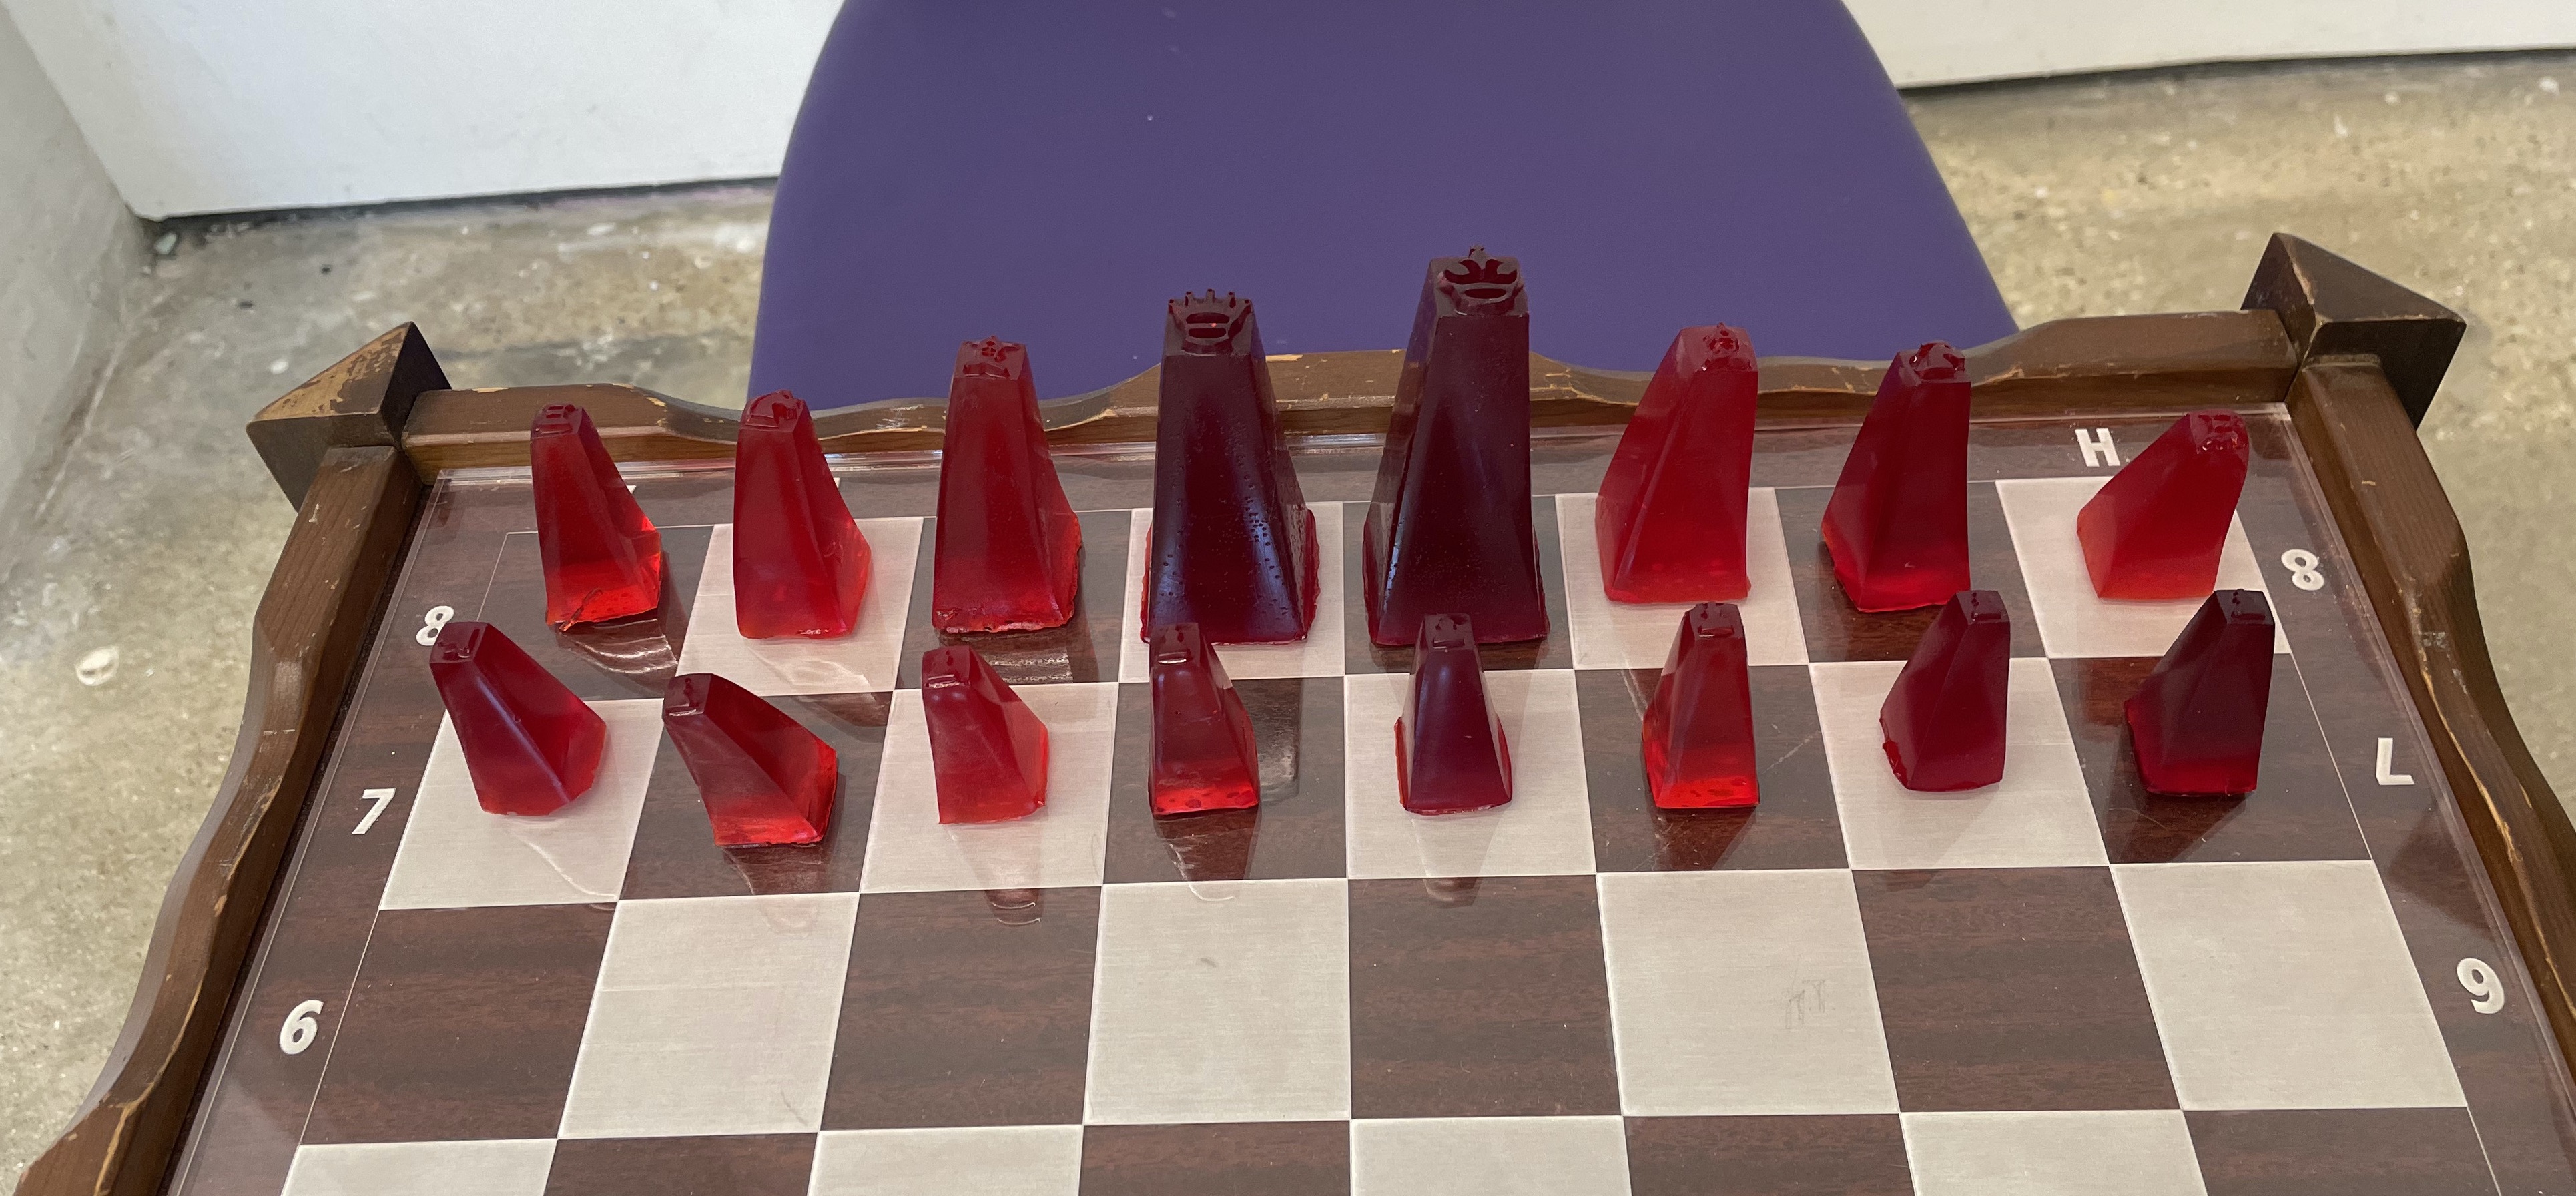 How To Copy Chess Pieces, Resin Craft Blog